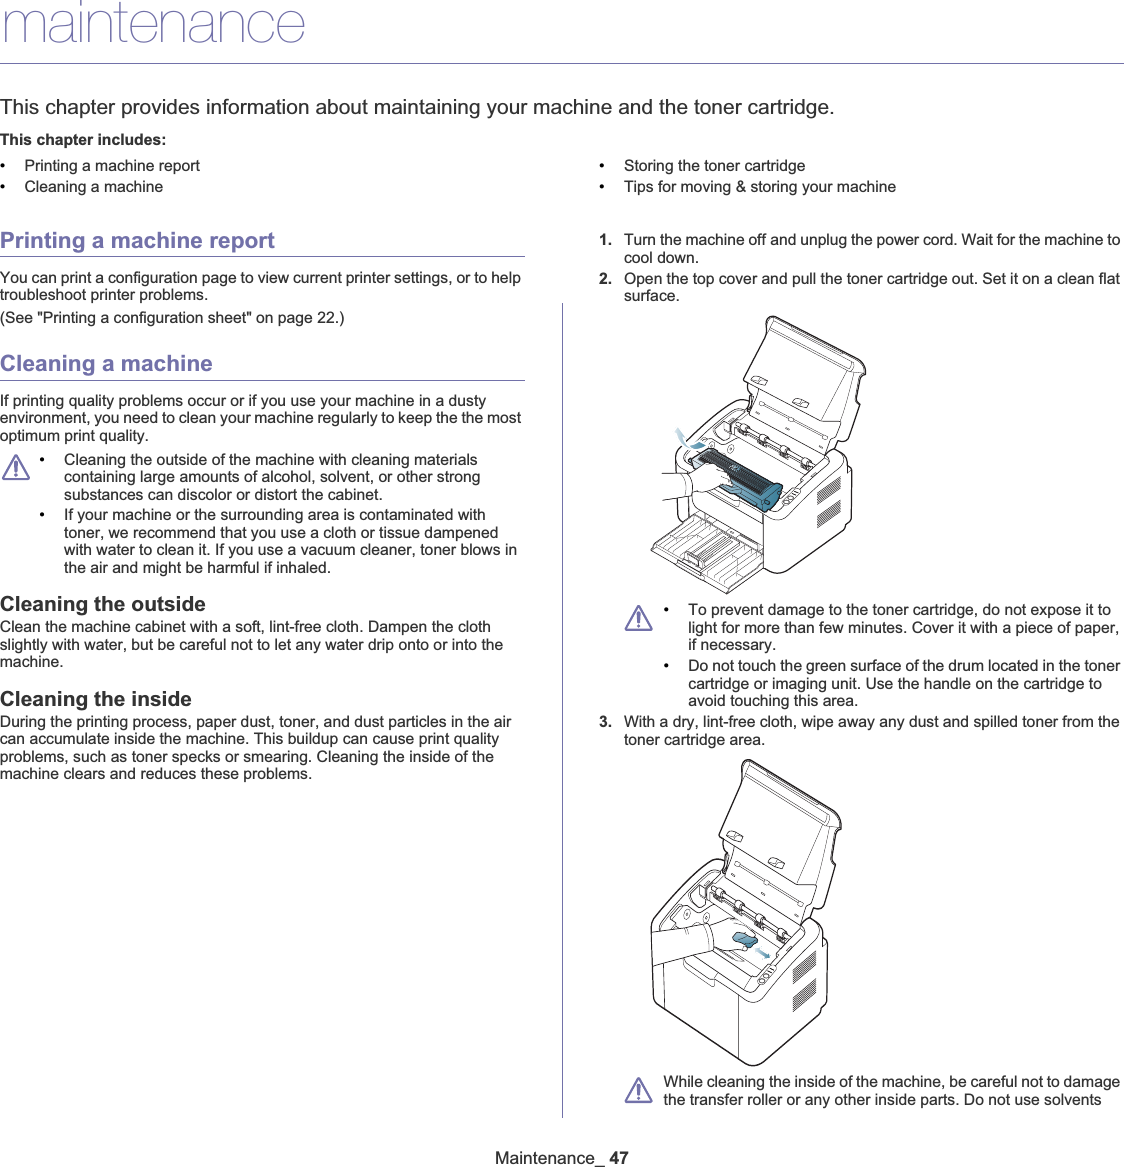 Maintenance_ 477.maintenanceThis chapter provides information about maintaining your machine and the toner cartridge.This chapter includes:•Printing a machine report•Cleaning a machine•Storing the toner cartridge•Tips for moving &amp; storing your machinePrinting a machine reportYou can print a configuration page to view current printer settings, or to help troubleshoot printer problems. (See &quot;Printing a configuration sheet&quot; on page 22.)Cleaning a machineIf printing quality problems occur or if you use your machine in a dusty environment, you need to clean your machine regularly to keep the the most optimum print quality.•Cleaning the outside of the machine with cleaning materials containing large amounts of alcohol, solvent, or other strong substances can discolor or distort the cabinet. •If your machine or the surrounding area is contaminated with toner, we recommend that you use a cloth or tissue dampened with water to clean it. If you use a vacuum cleaner, toner blows in the air and might be harmful if inhaled.Cleaning the outsideClean the machine cabinet with a soft, lint-free cloth. Dampen the cloth slightly with water, but be careful not to let any water drip onto or into the machine.Cleaning the insideDuring the printing process, paper dust, toner, and dust particles in the air can accumulate inside the machine. This buildup can cause print quality problems, such as toner specks or smearing. Cleaning the inside of the machine clears and reduces these problems.1. Turn the machine offGand unplug the power cord. Wait for the machine to cool down.2. Open the top cover and pull the toner cartridge out. Set it on a clean flat surface.•To prevent damage to the toner cartridge, do not expose it to light for more than few minutes. Cover it with a piece of paper, if necessary. •Do not touch the green surface of the drum located in the toner cartridge or imaging unit. Use the handle on the cartridge to avoid touching this area.3. With a dry, lint-free cloth, wipe away any dust and spilled toner from the toner cartridge area.While cleaning the inside of the machine, be careful not to damage the transfer roller or any other inside parts. Do not use solvents 